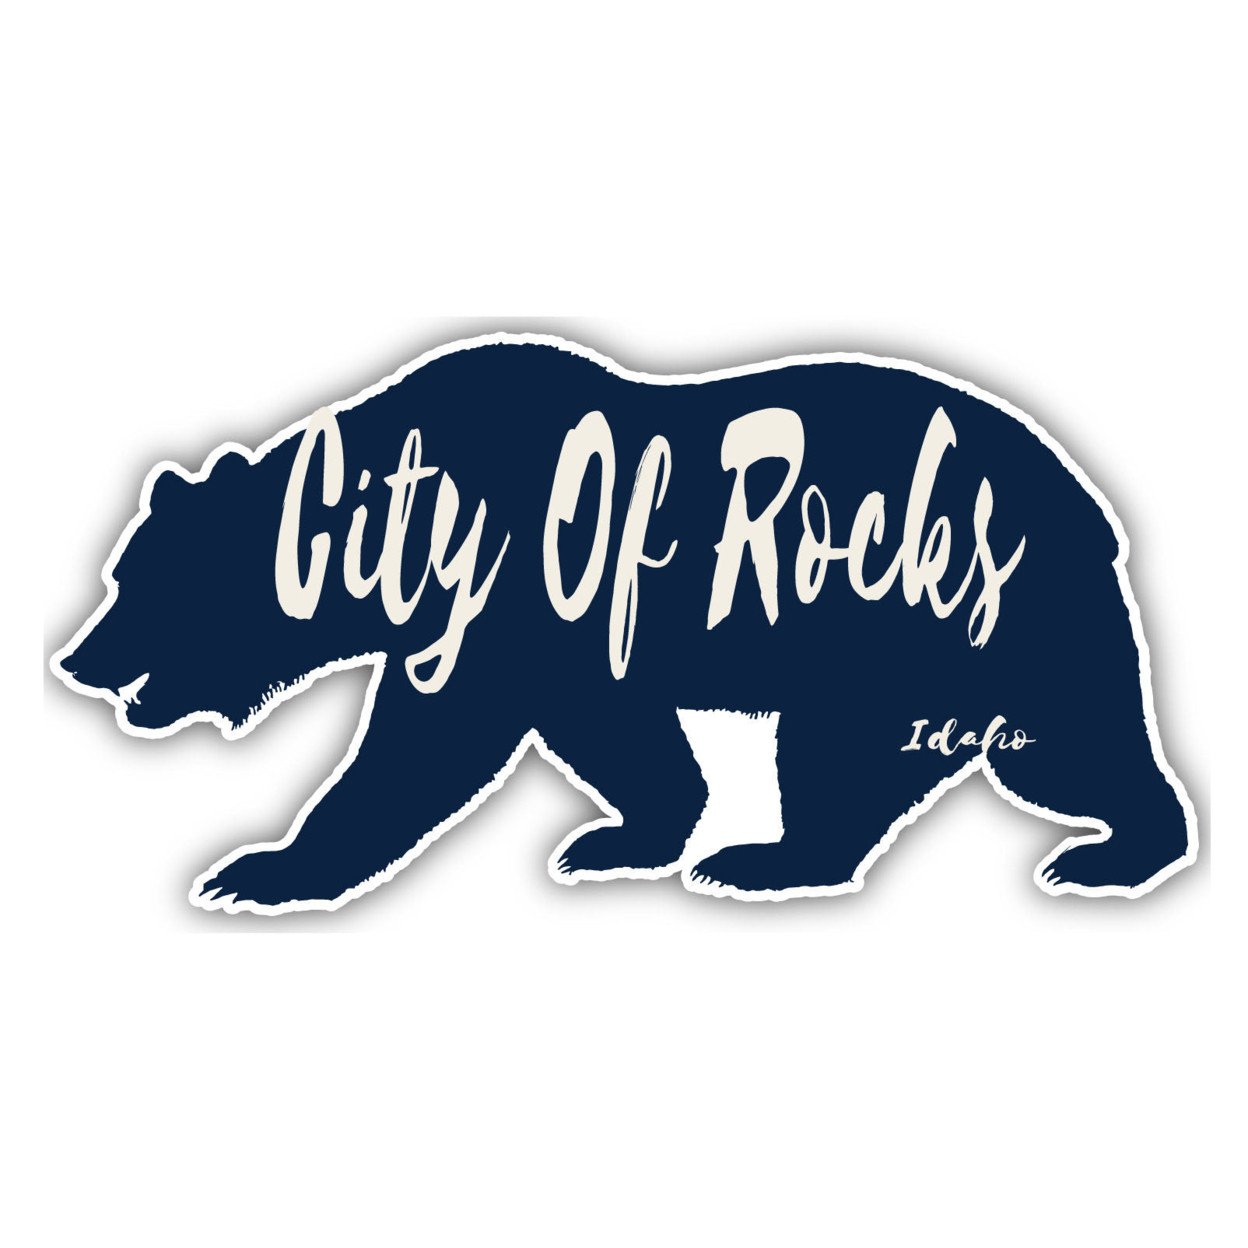 City Of Rocks Idaho Souvenir Decorative Stickers (Choose Theme And Size) - 4-Pack, 4-Inch, Bear